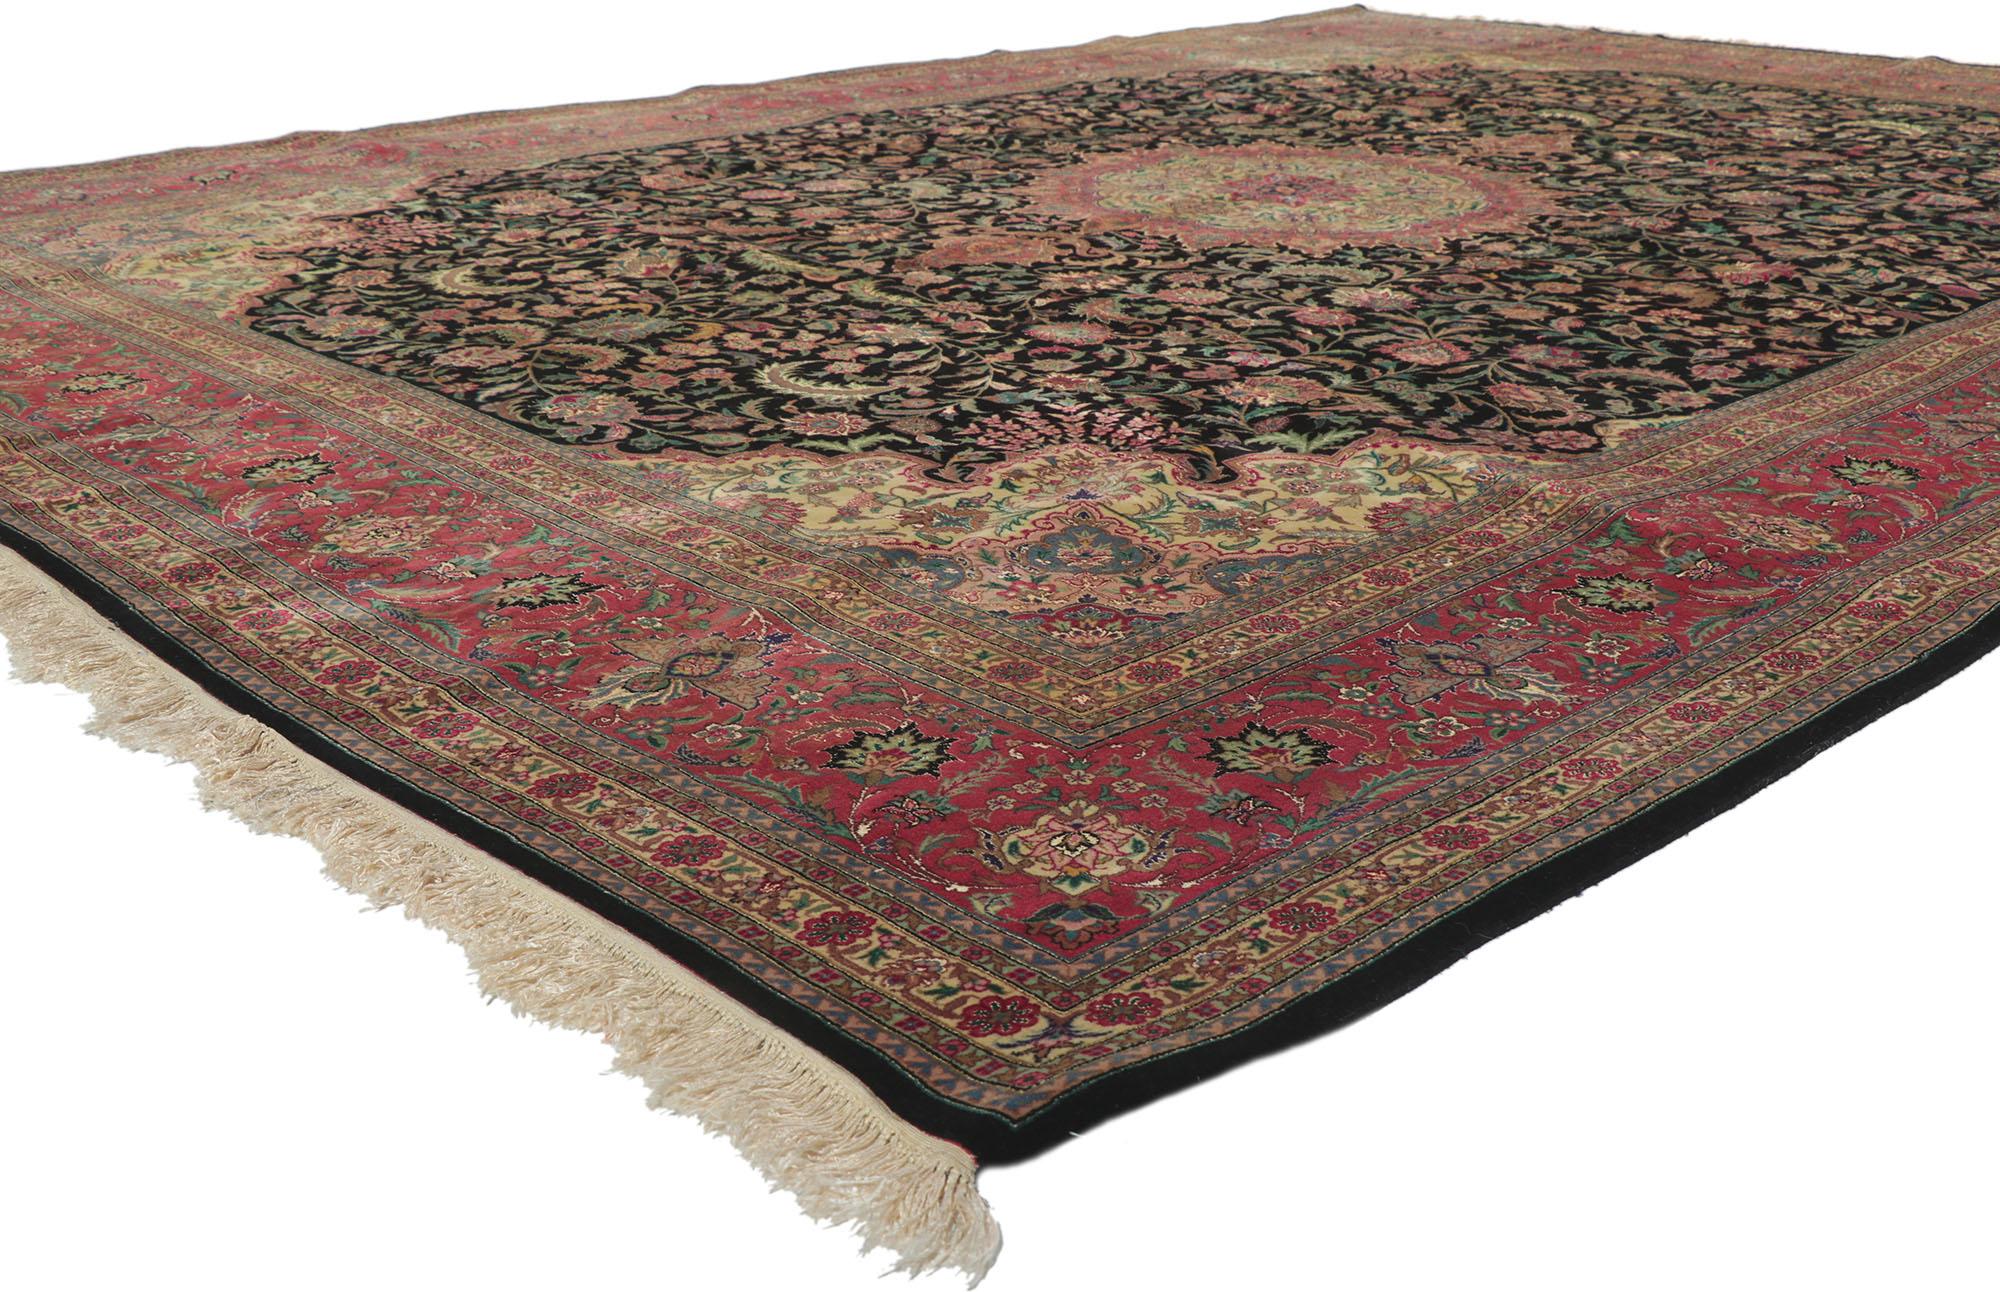 78169 Vintage Persian Tabriz Style rug, 08'11 x 12'00. With ornate details and well-balanced symmetry, this hand-knotted wool and silk Persian Tabriz style rug is poised to impress. Taking center stage is a a round medallion anchored with palmette